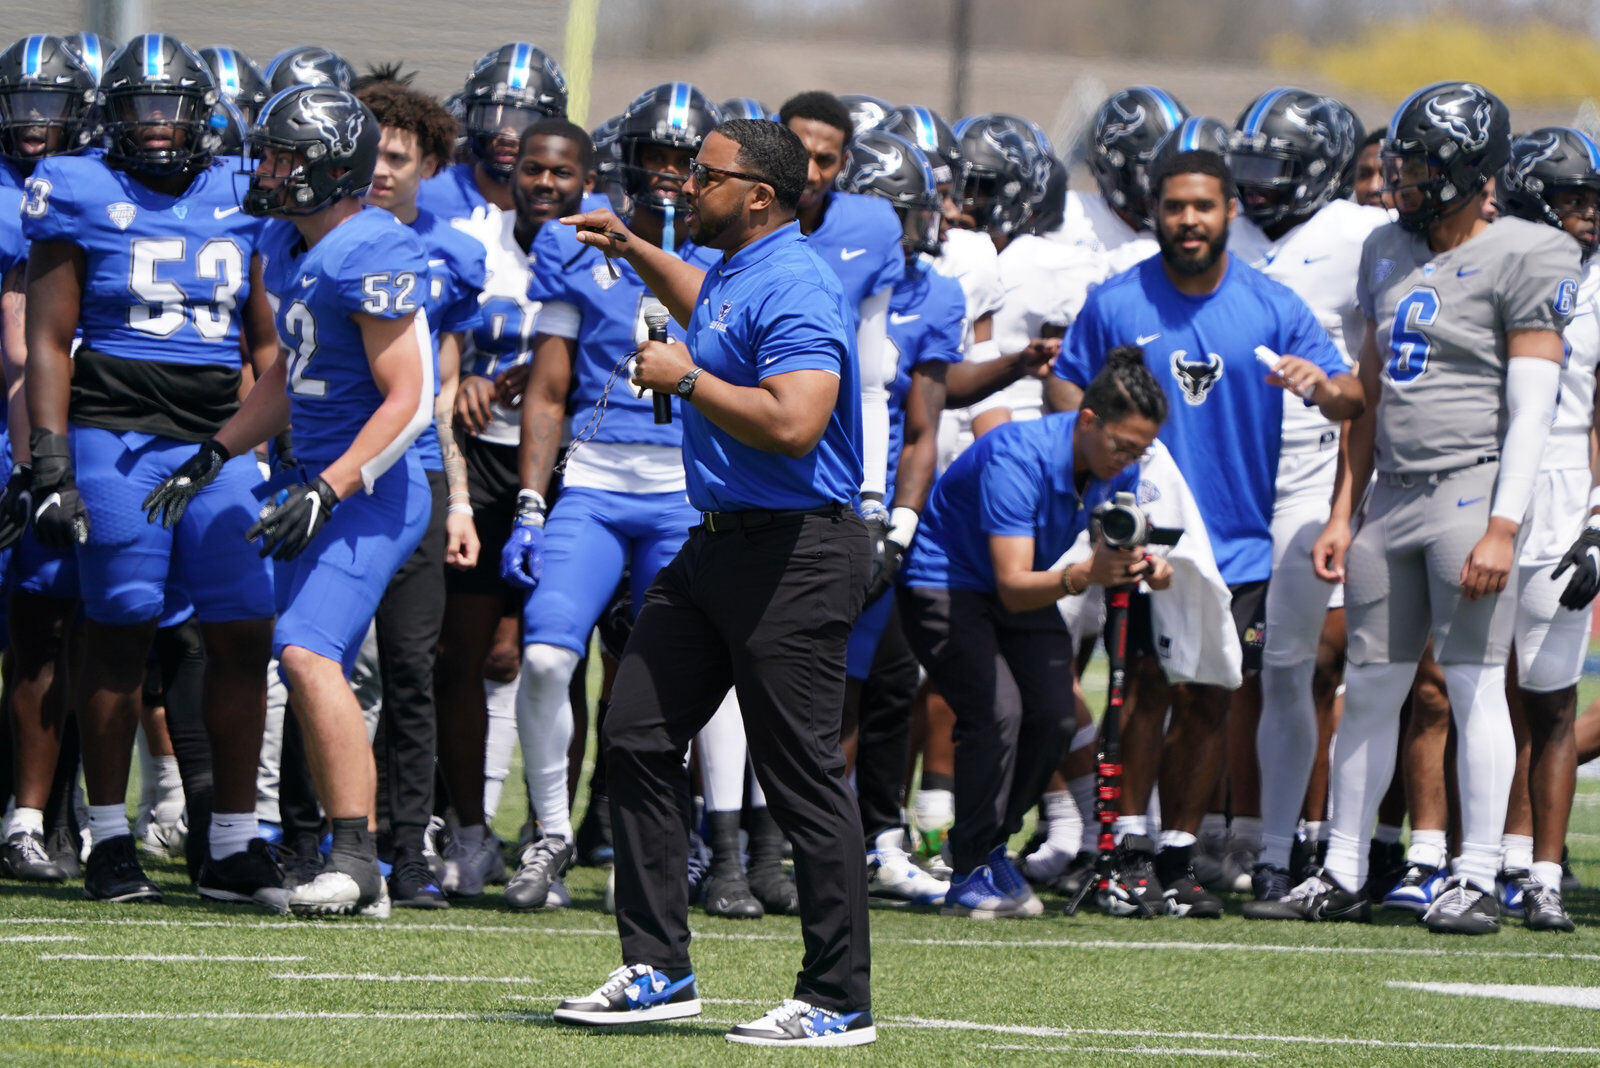 Finding the sweet spot How UB football is putting together pieces with goal of wins